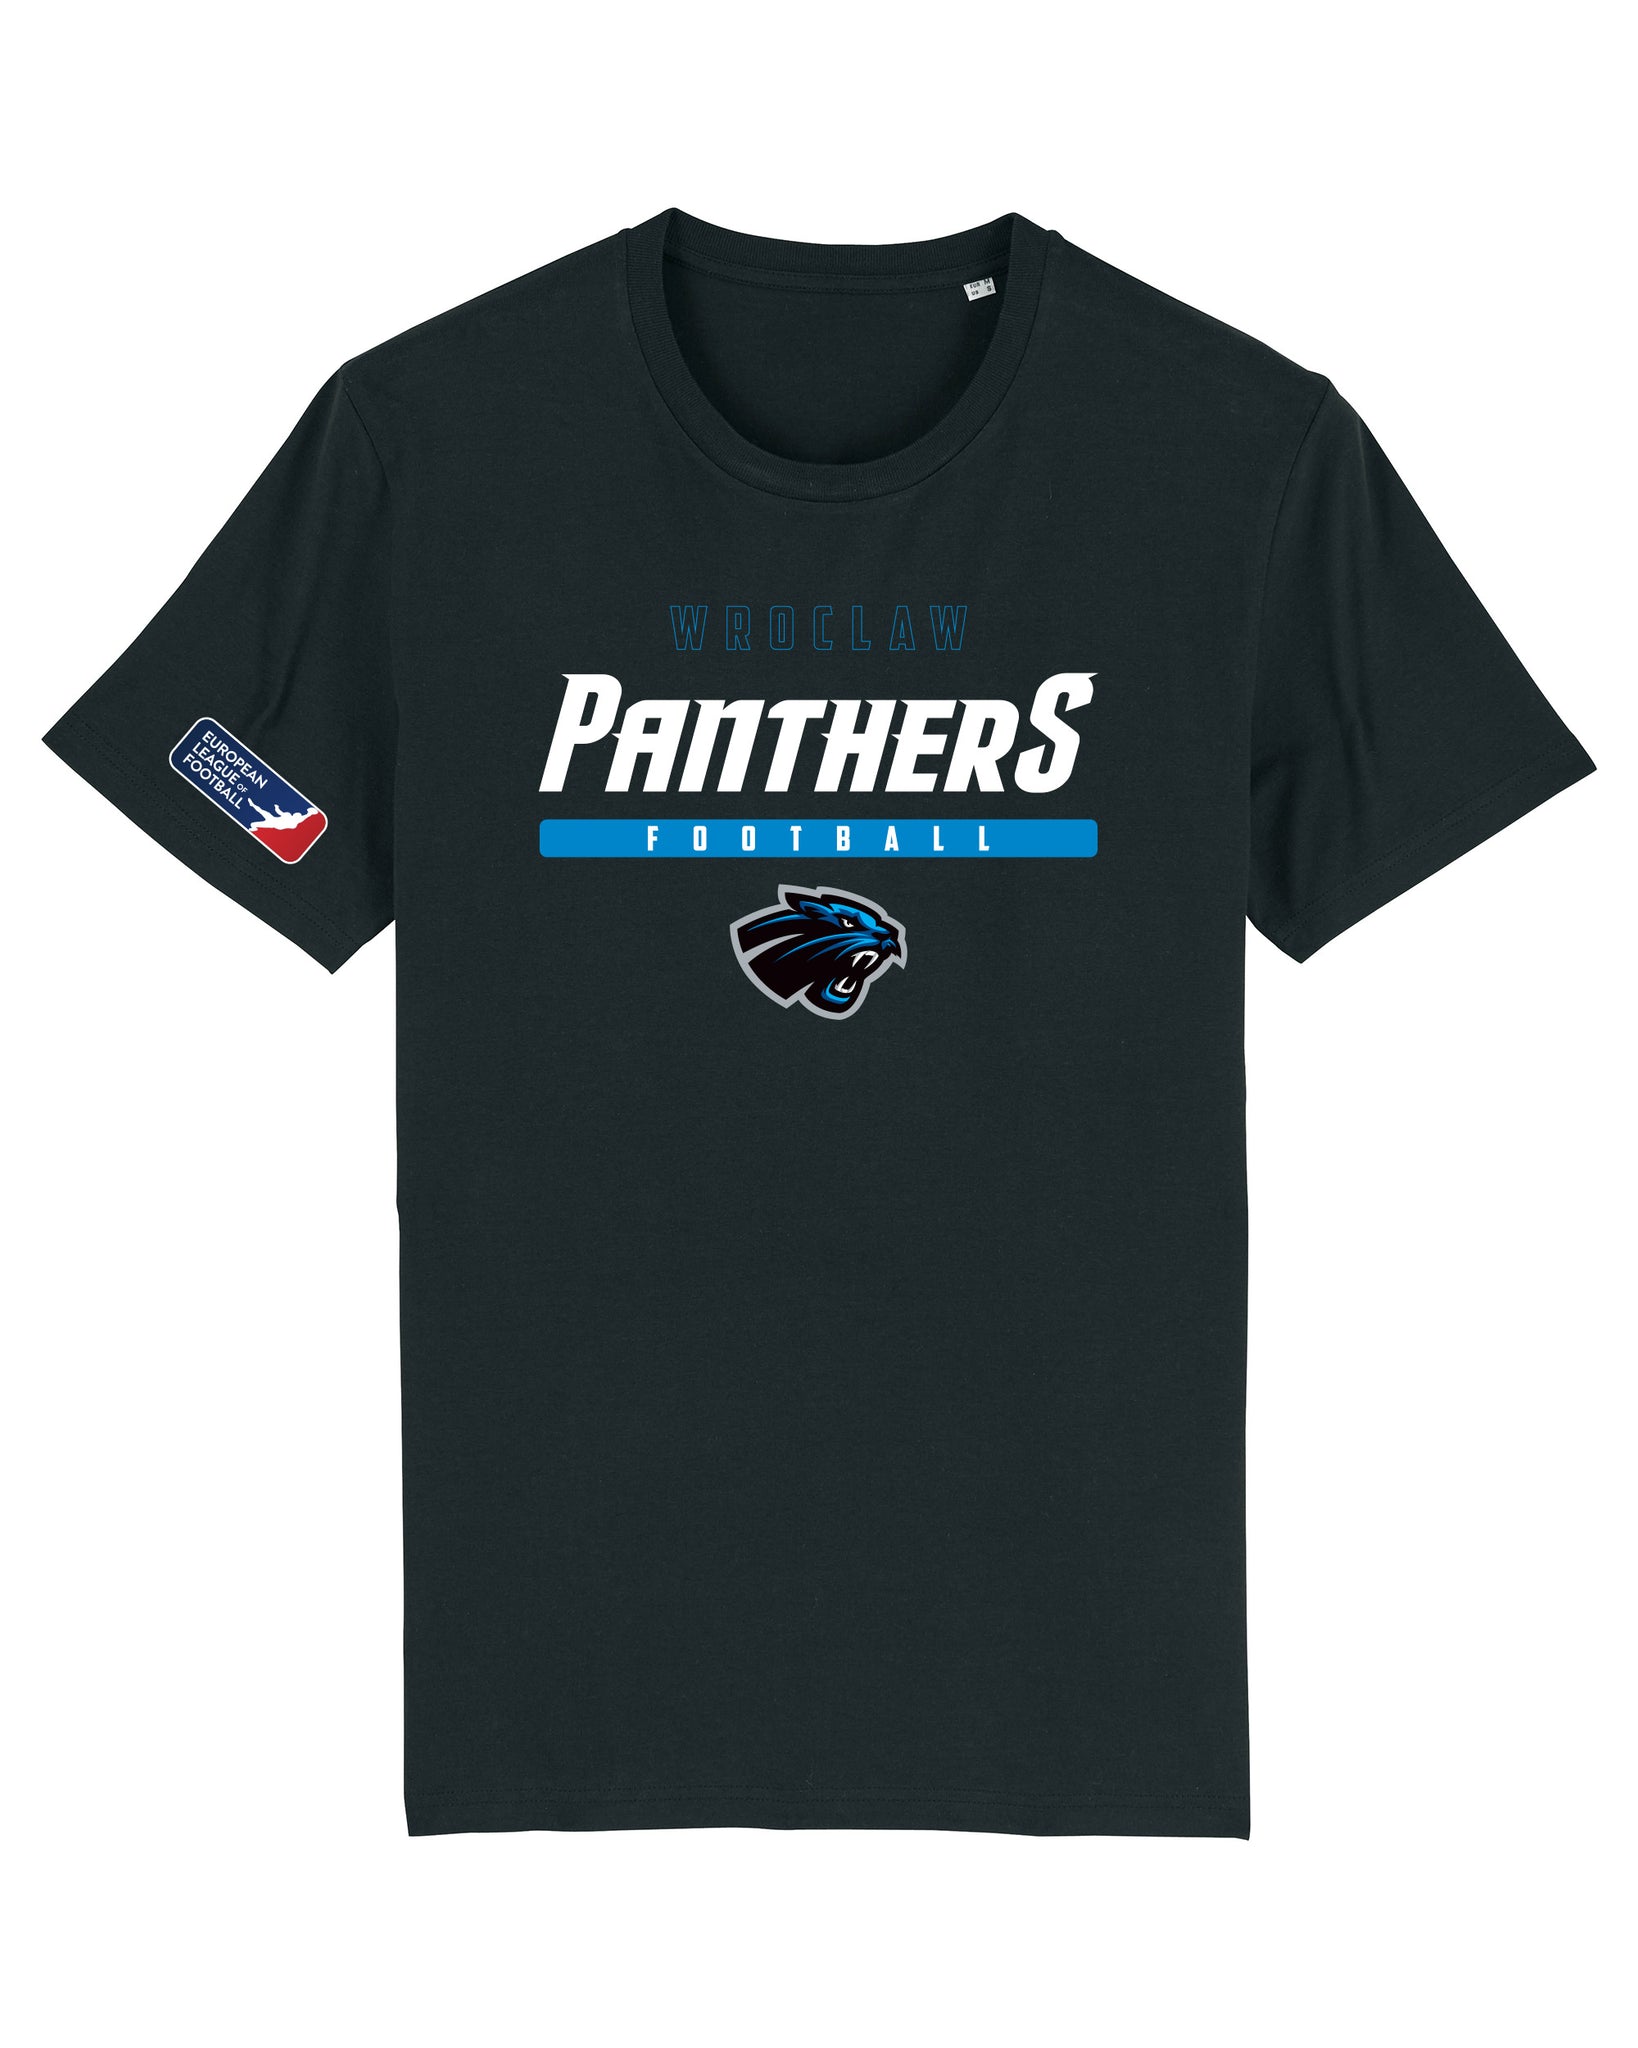 Wroclaw Panthers Identity T-Shirt